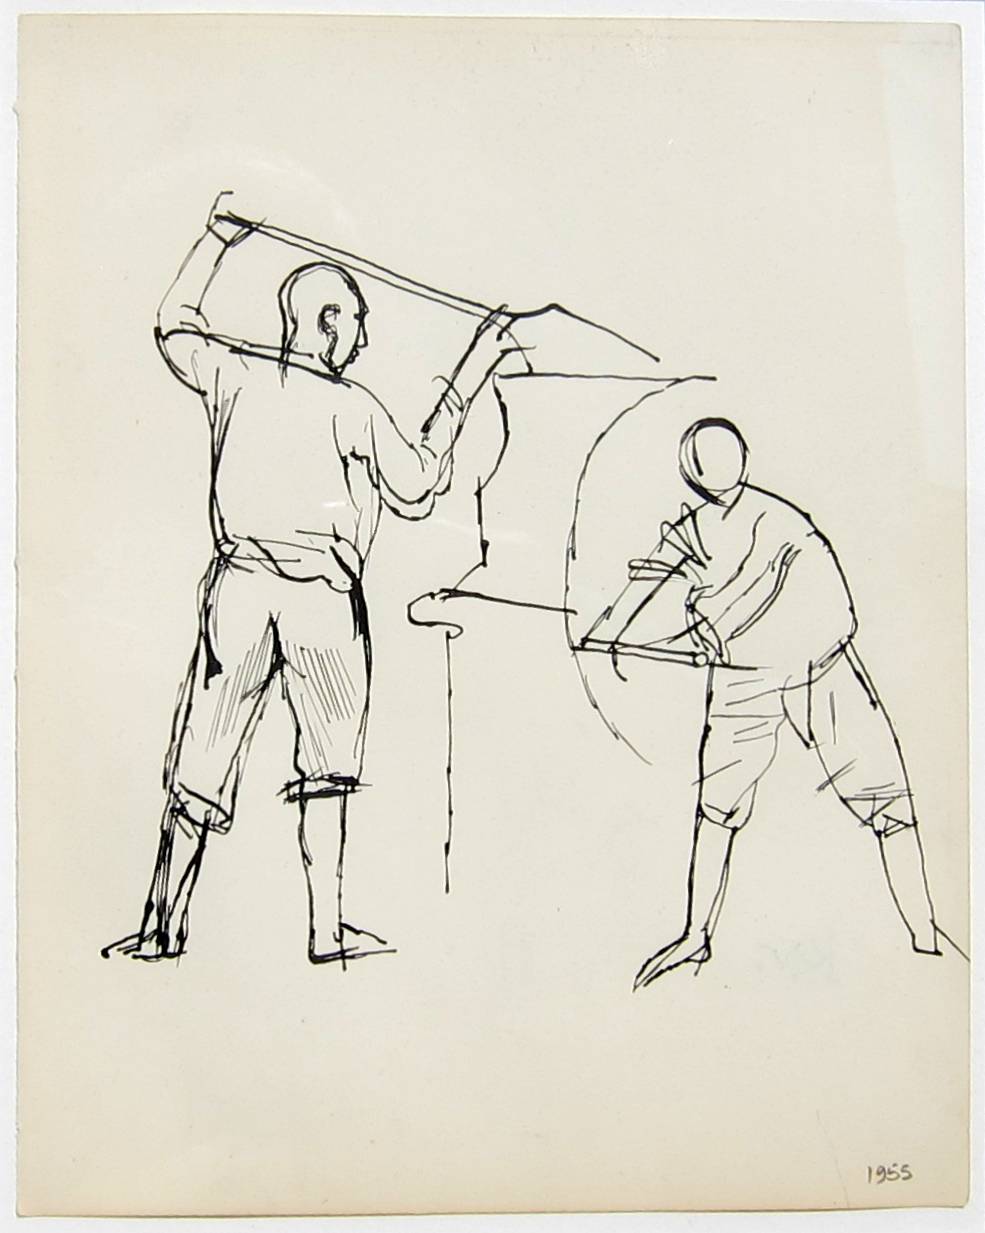 KEITH VAUGHAN [1912-77]. Two Engine Stokers, 1955. Ink. Studio stamp initials on reverse of drawing.